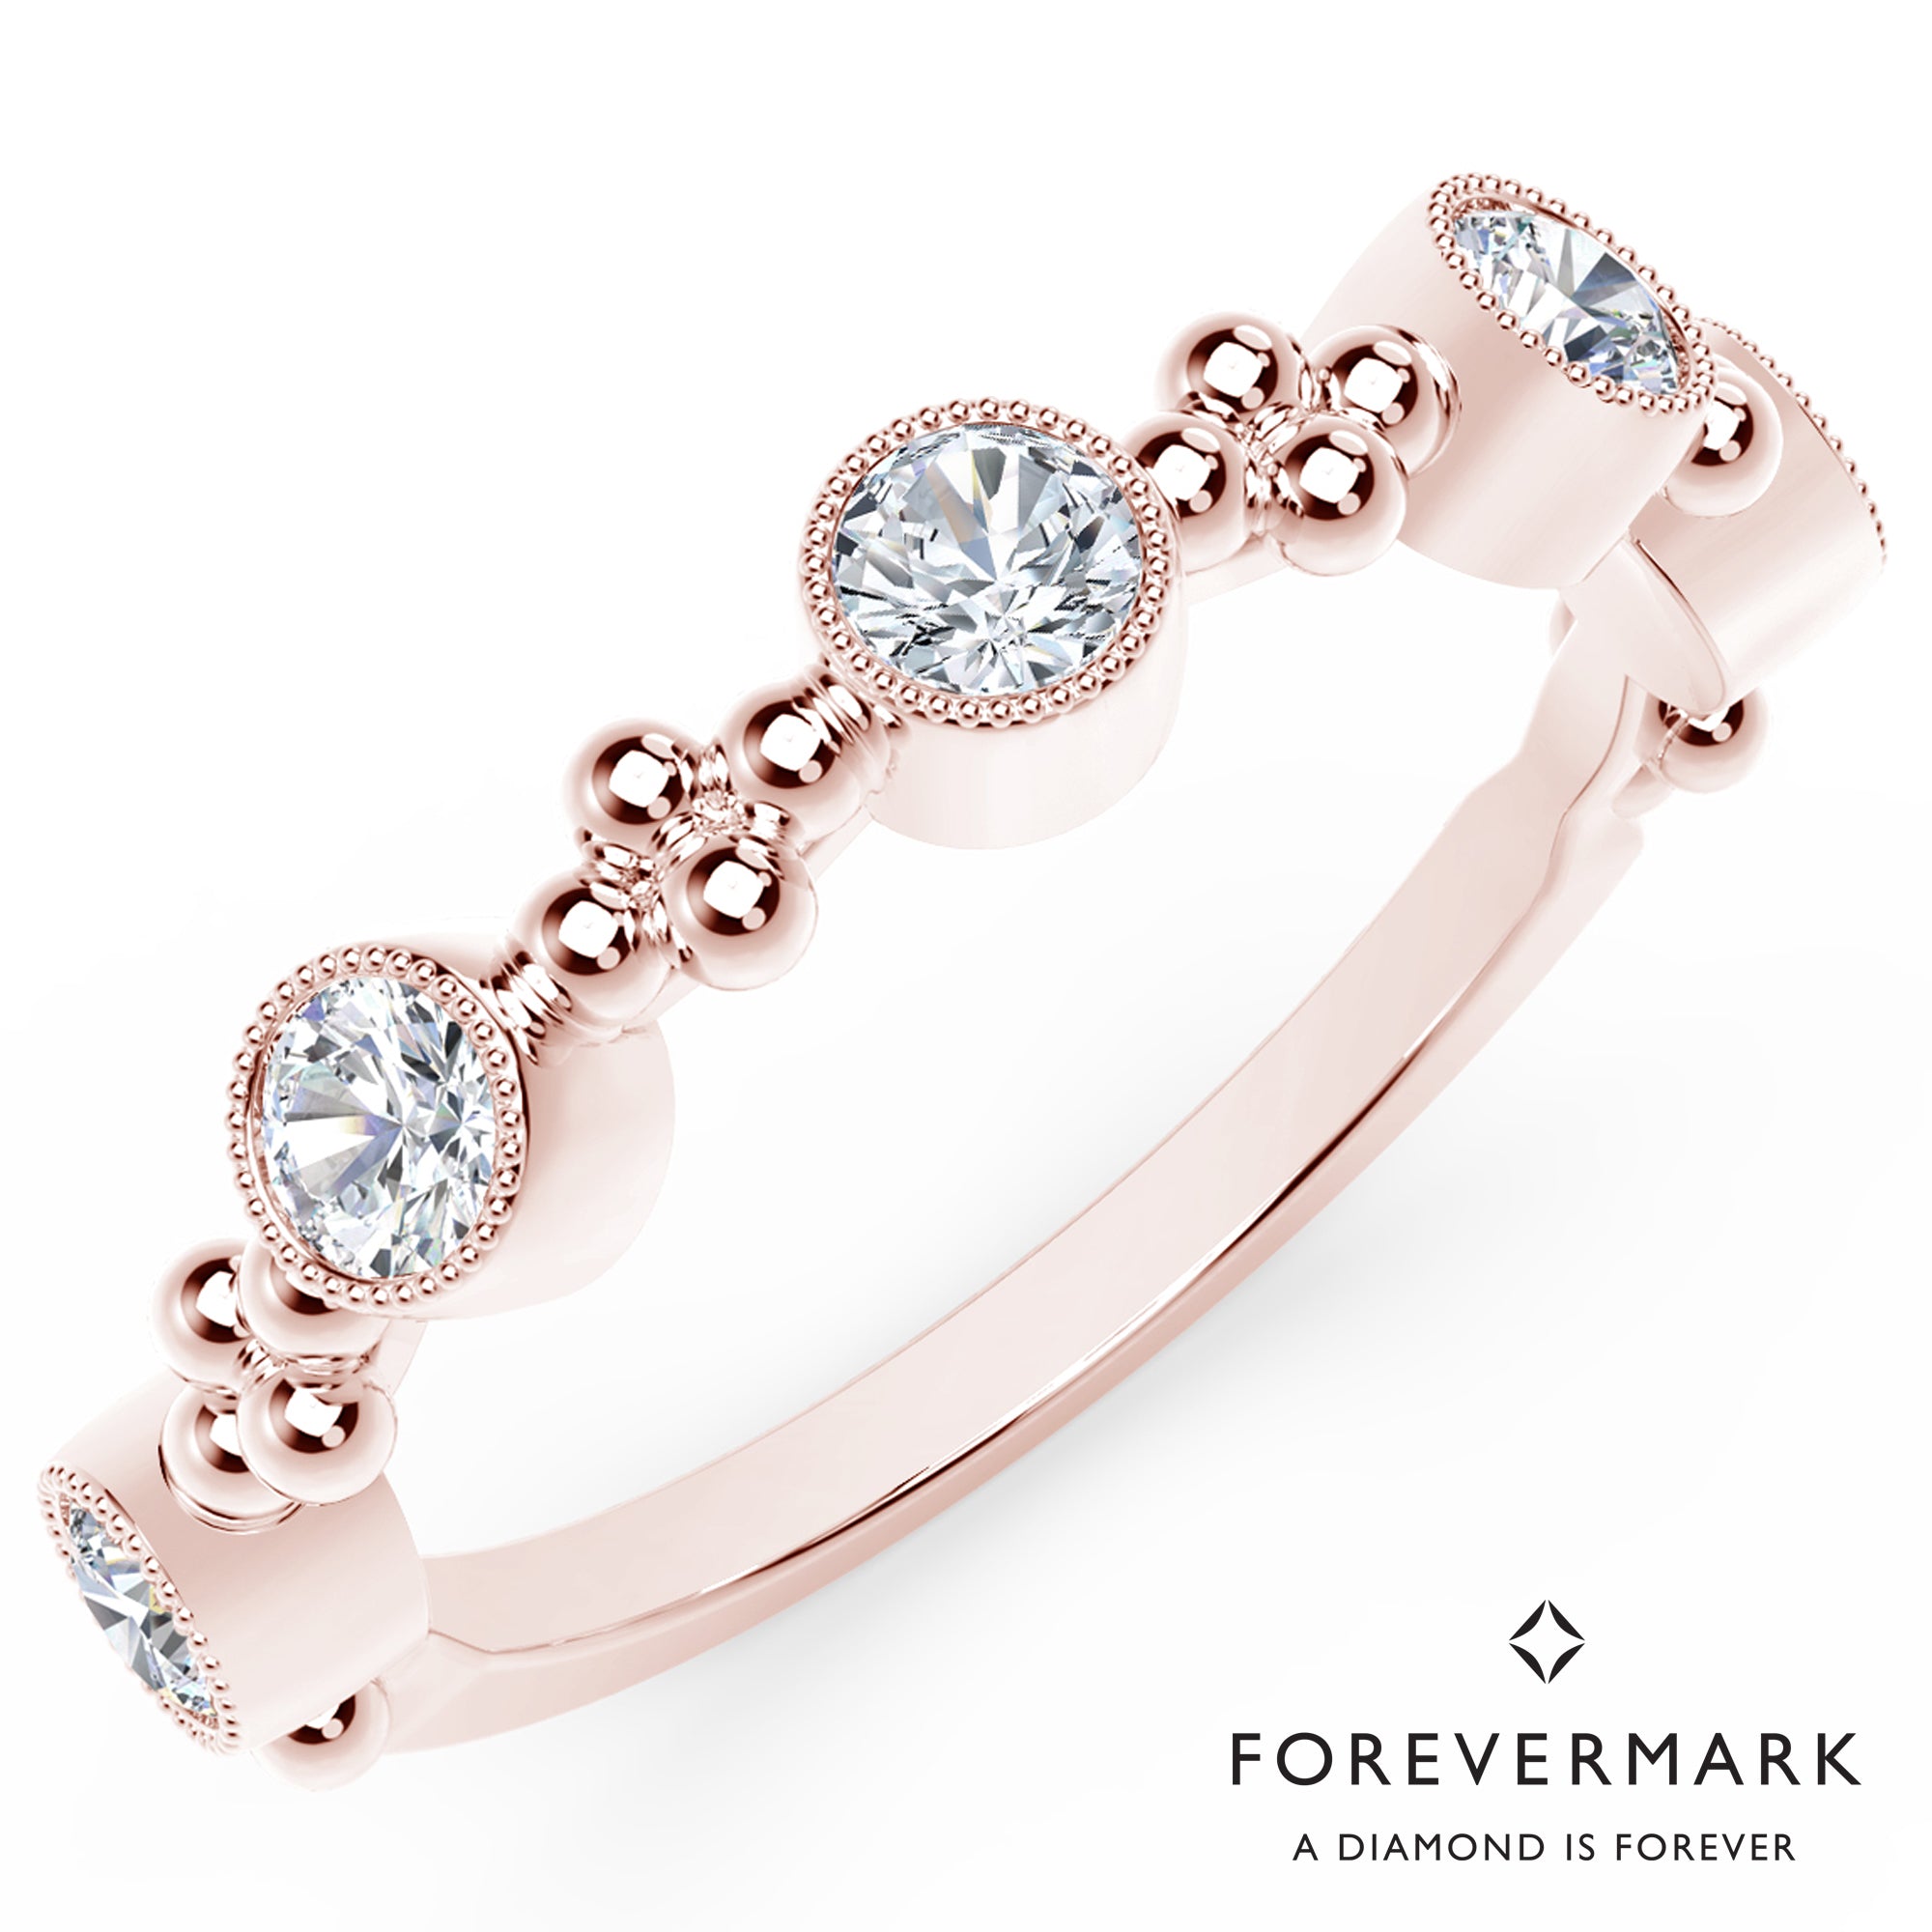 Tribute Collection Delicate Diamond Ring in 18kt Rose Gold (1/2ct tw)